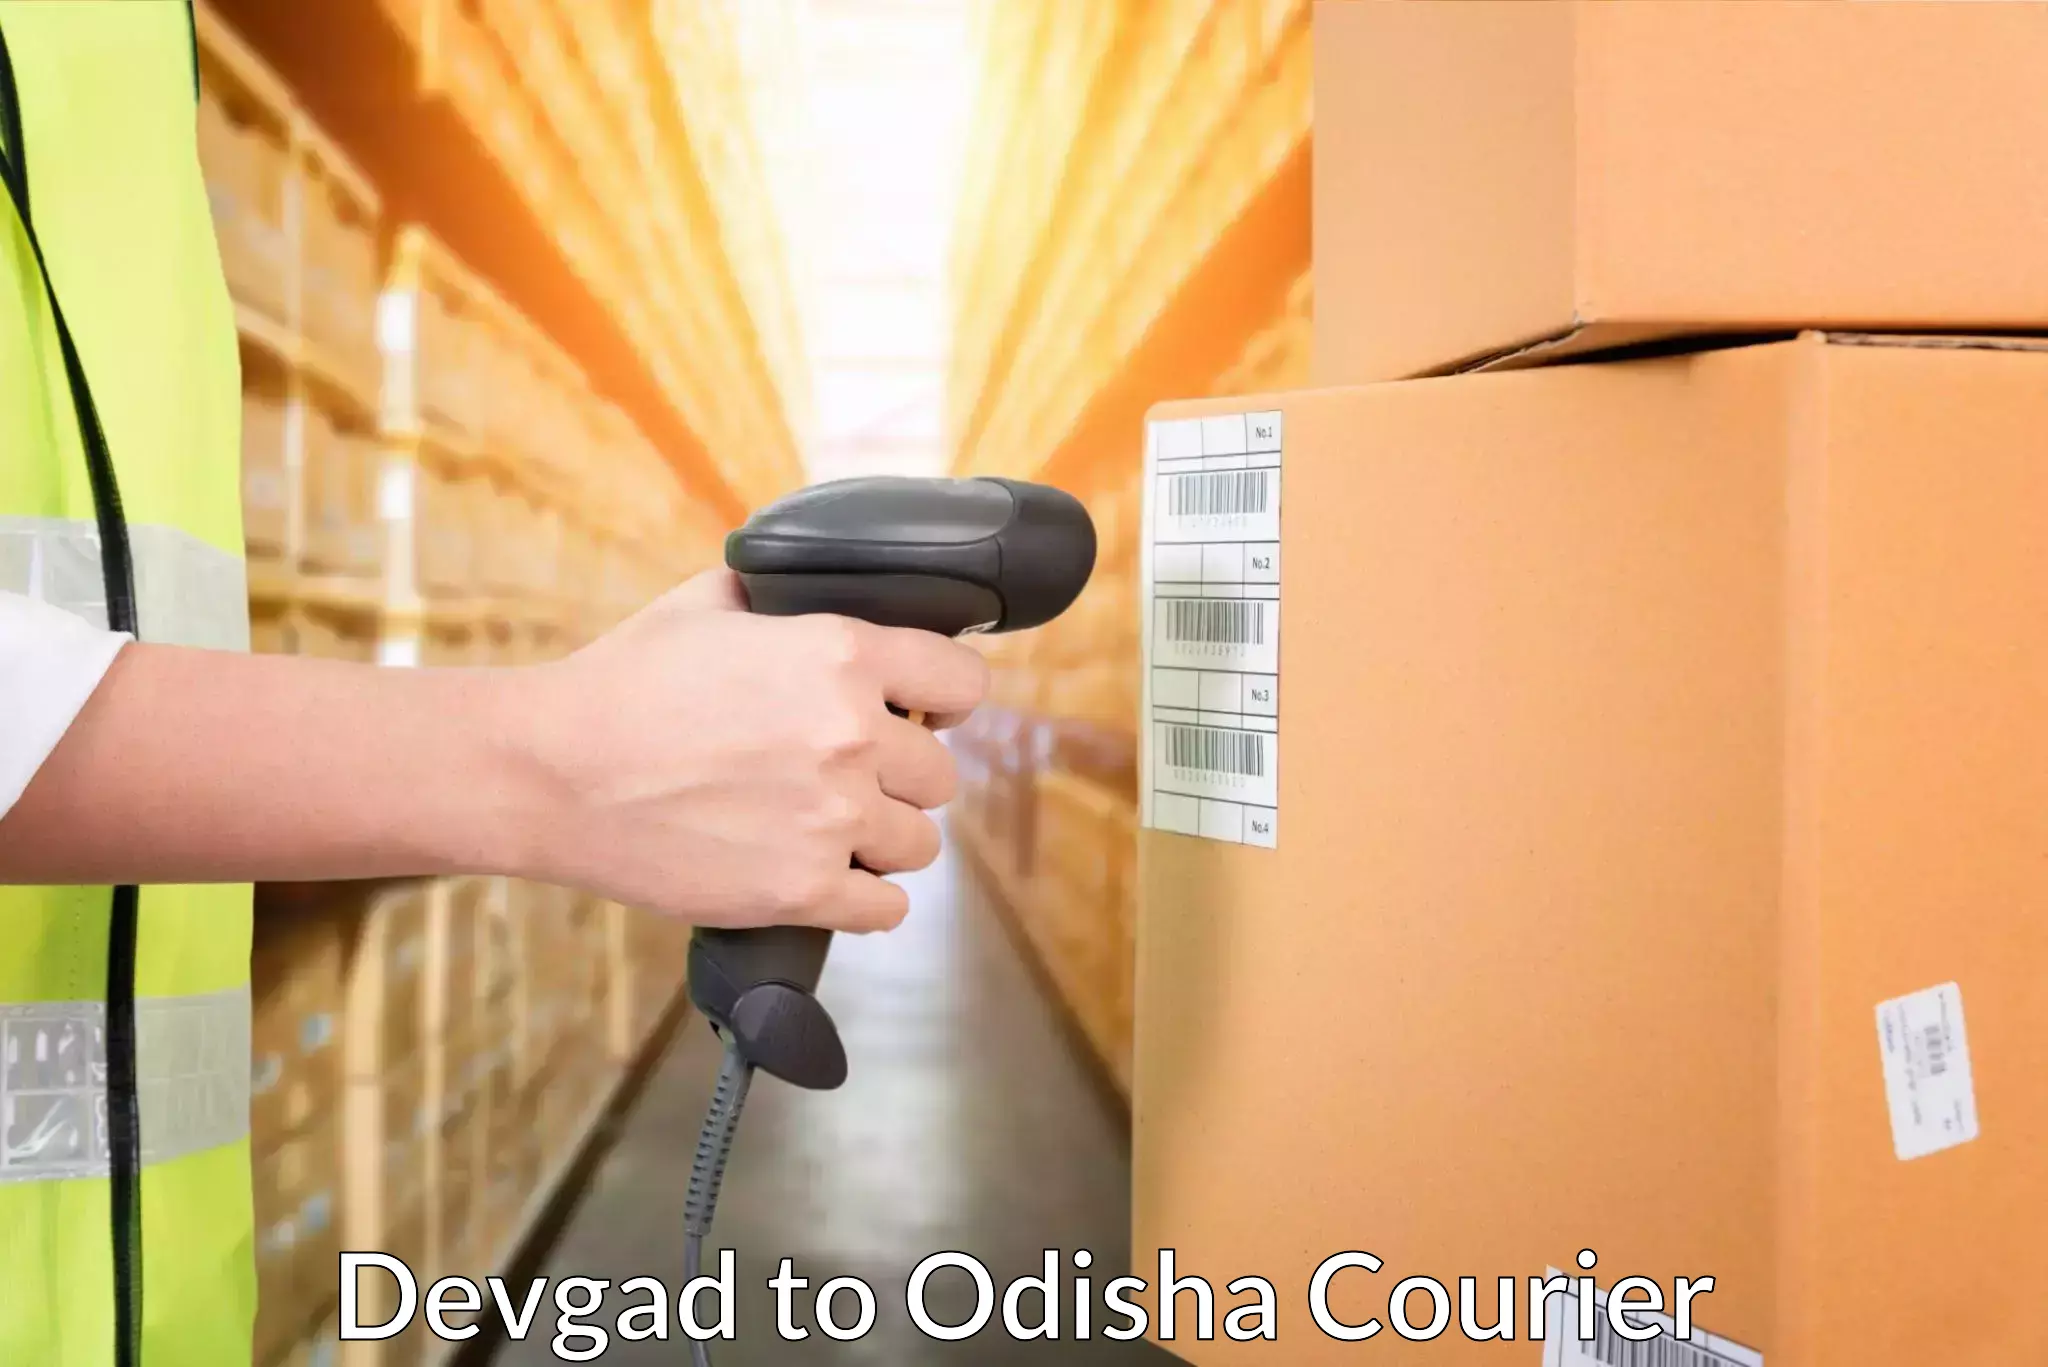 Nationwide shipping services Devgad to Mathili